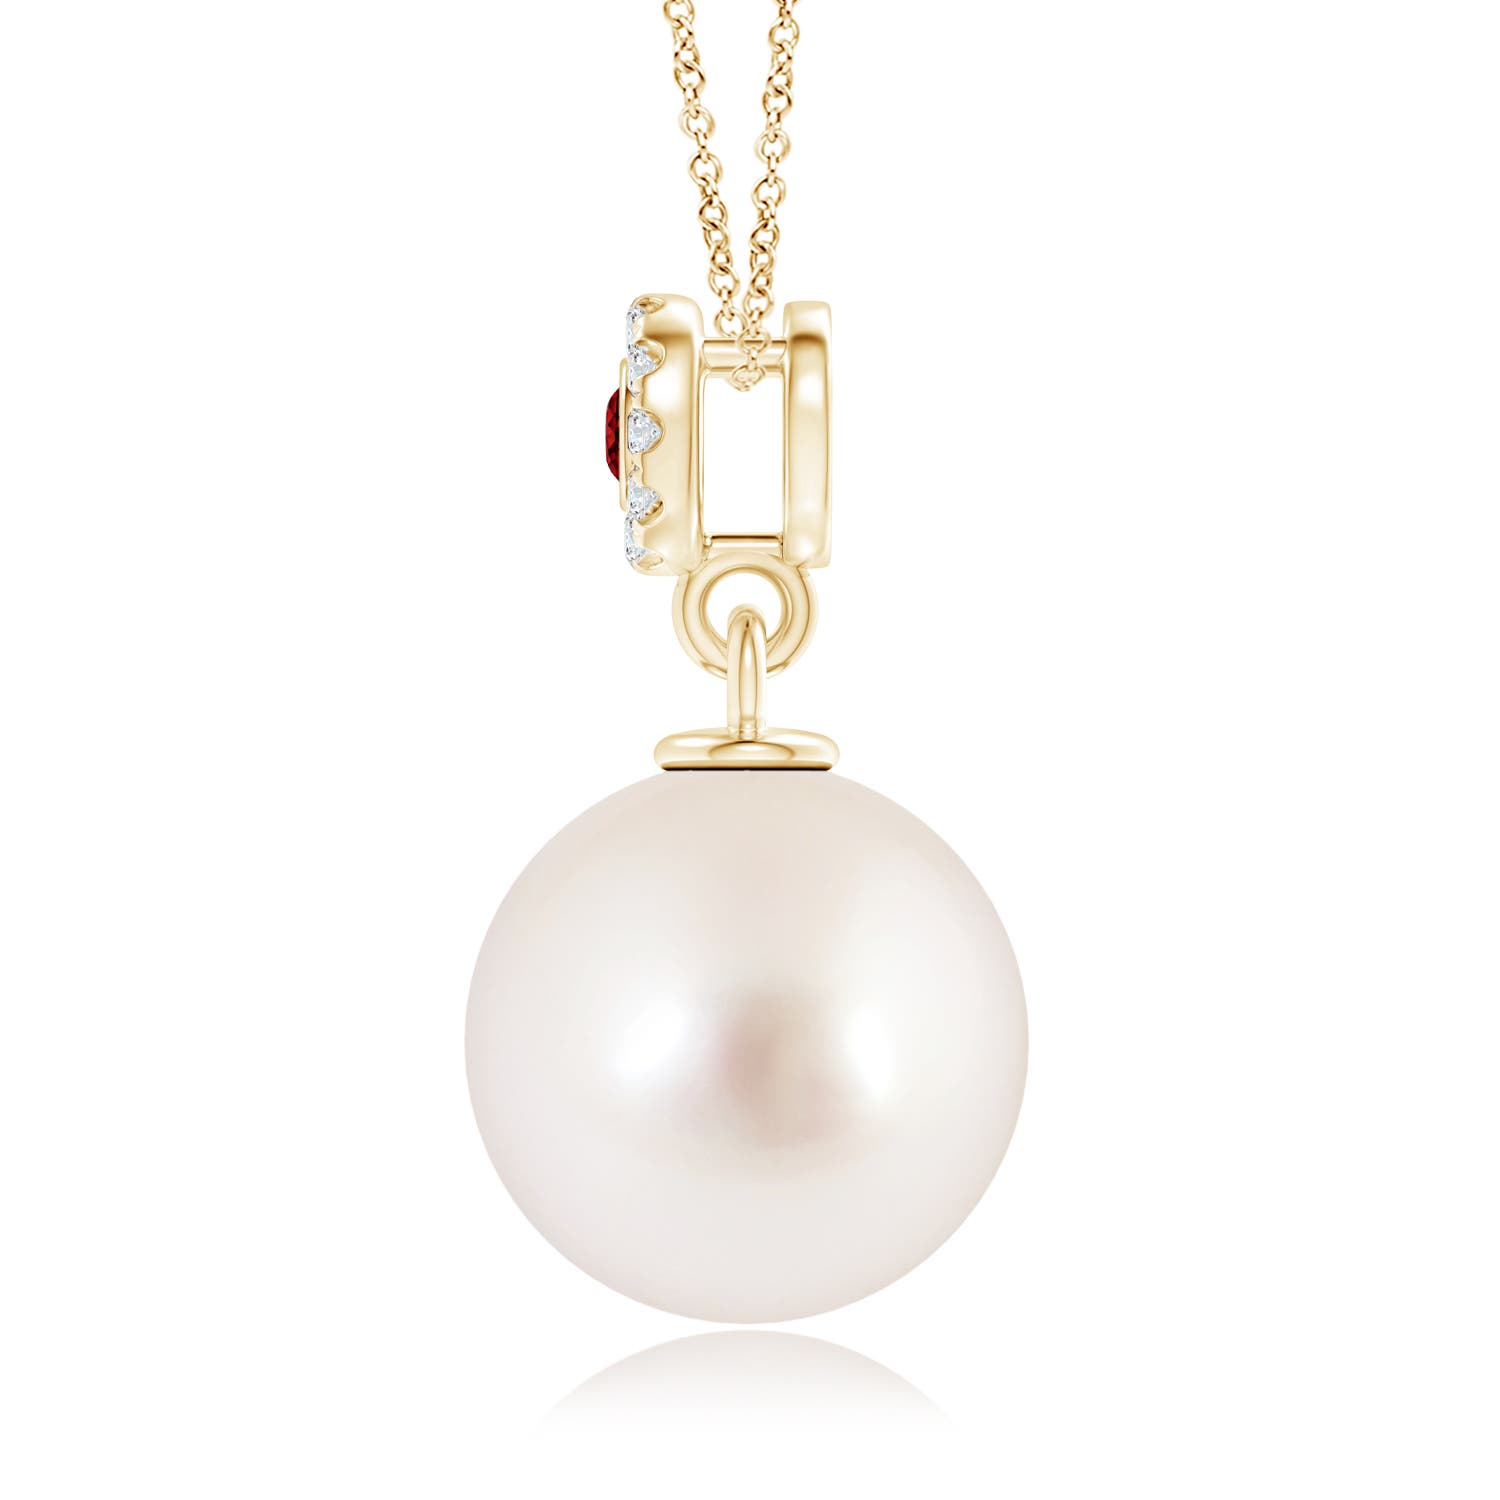 AAAA - South Sea Cultured Pearl / 7.31 CT / 14 KT Yellow Gold